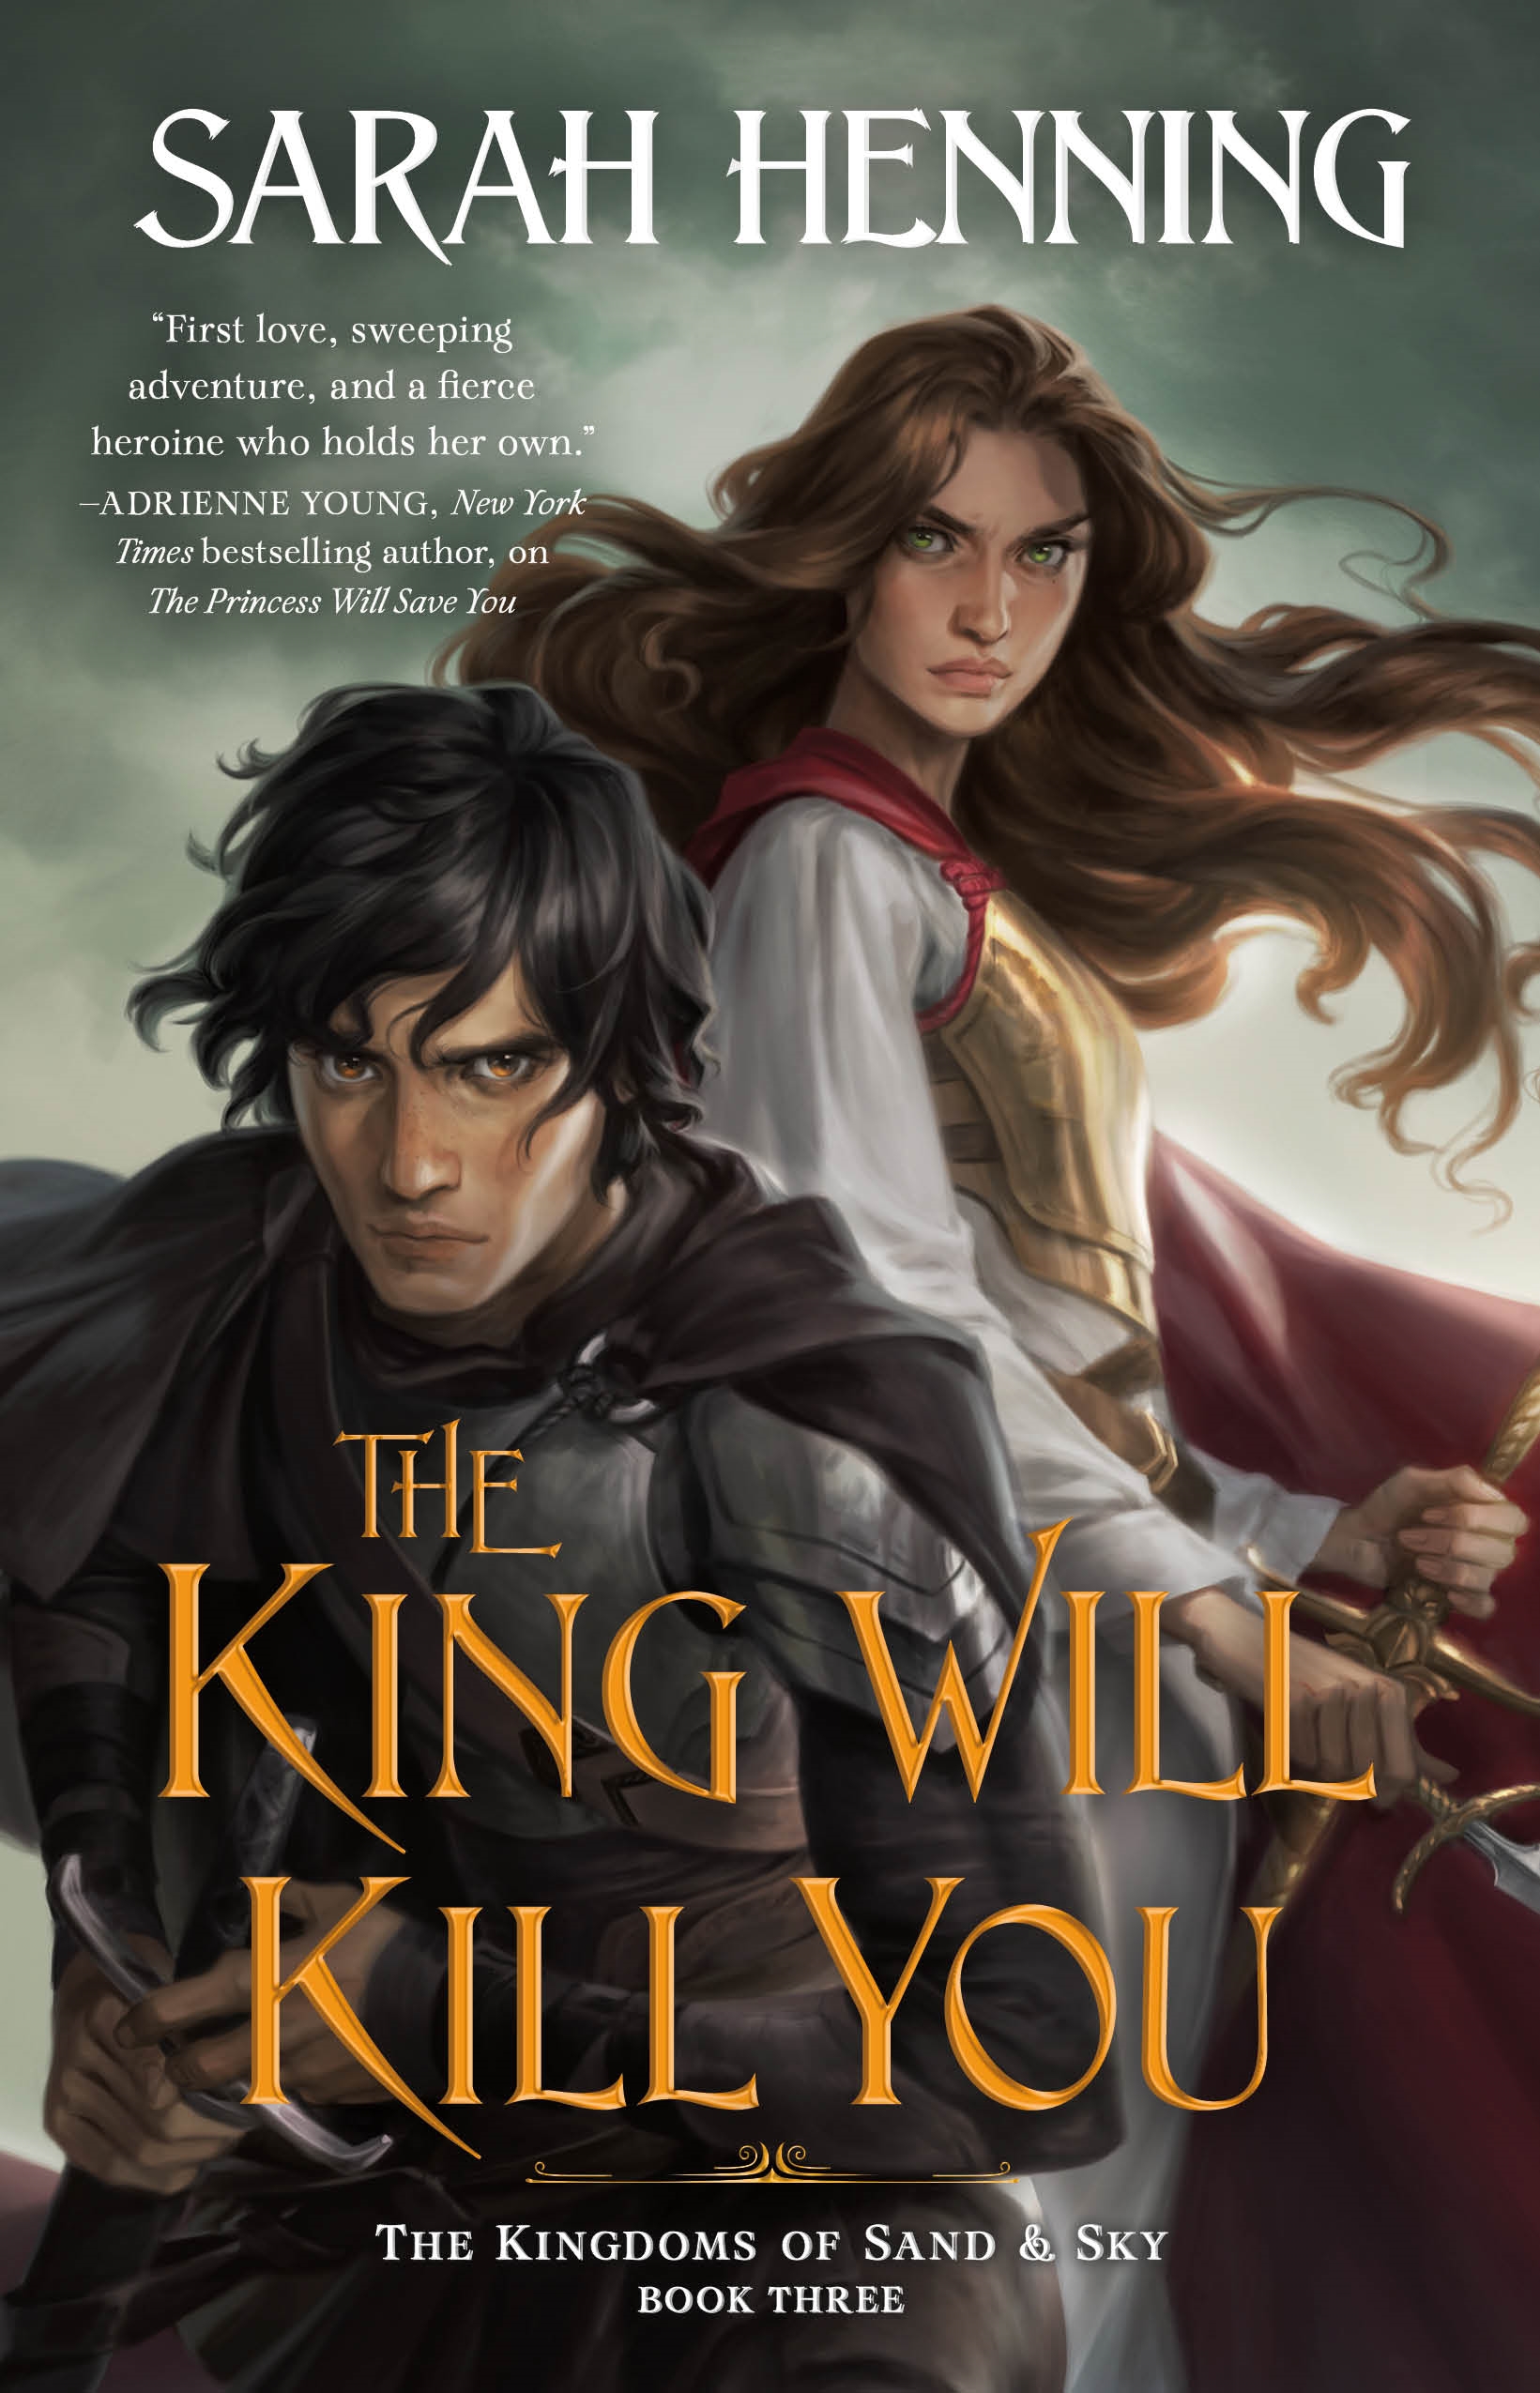 The King Will Kill You : The Kingdoms of Sand & Sky, Book Three by Sarah Henning